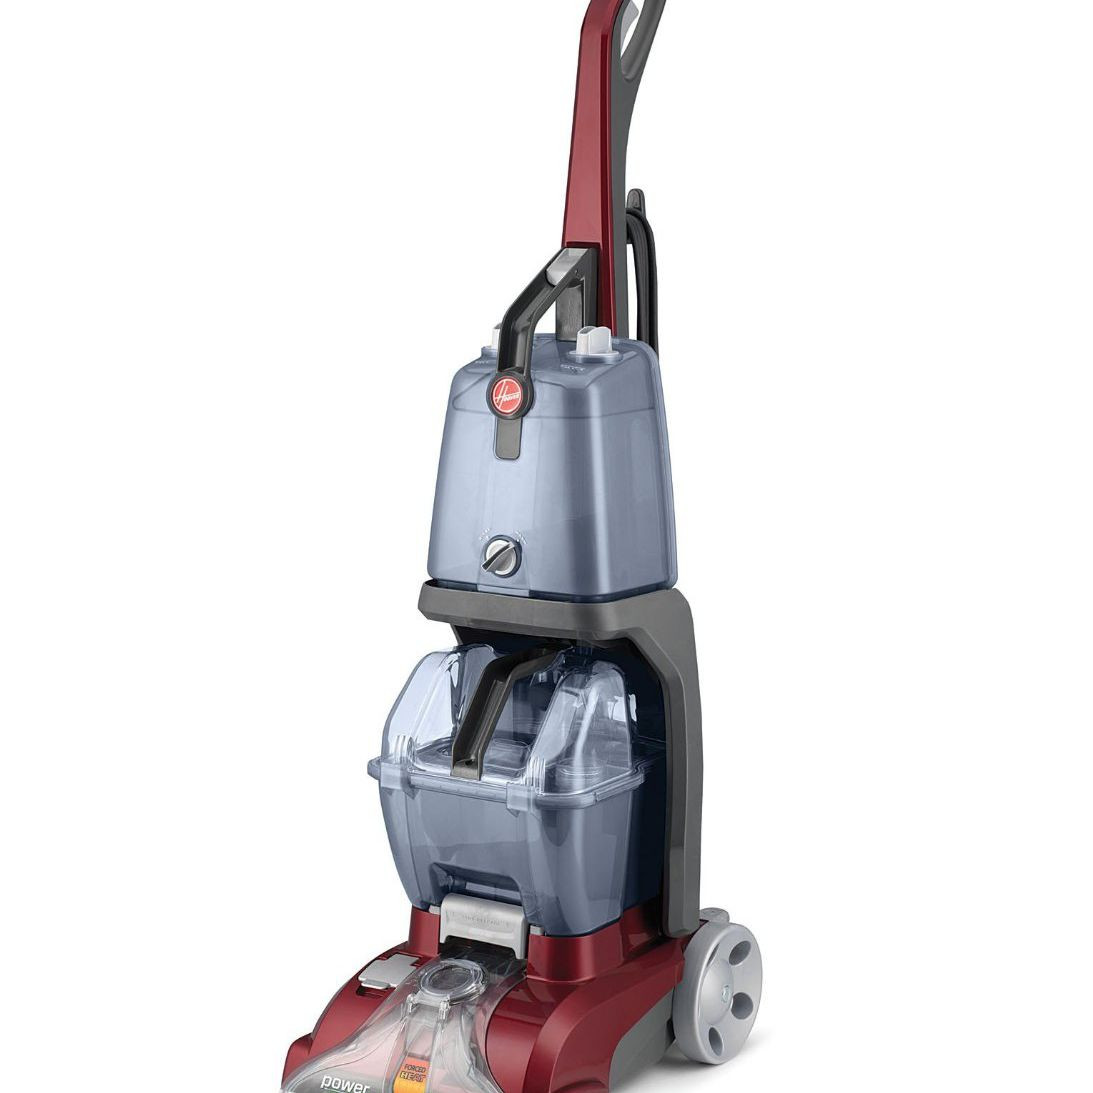 12 Lovable Hardwood Floor Vacuum and Steam Cleaner Reviews 2024 free download hardwood floor vacuum and steam cleaner reviews of the 9 best carpet cleaners to buy in 2018 pertaining to best overall hoover fh50150 carpet basics power scrub deluxe carpet cleaner